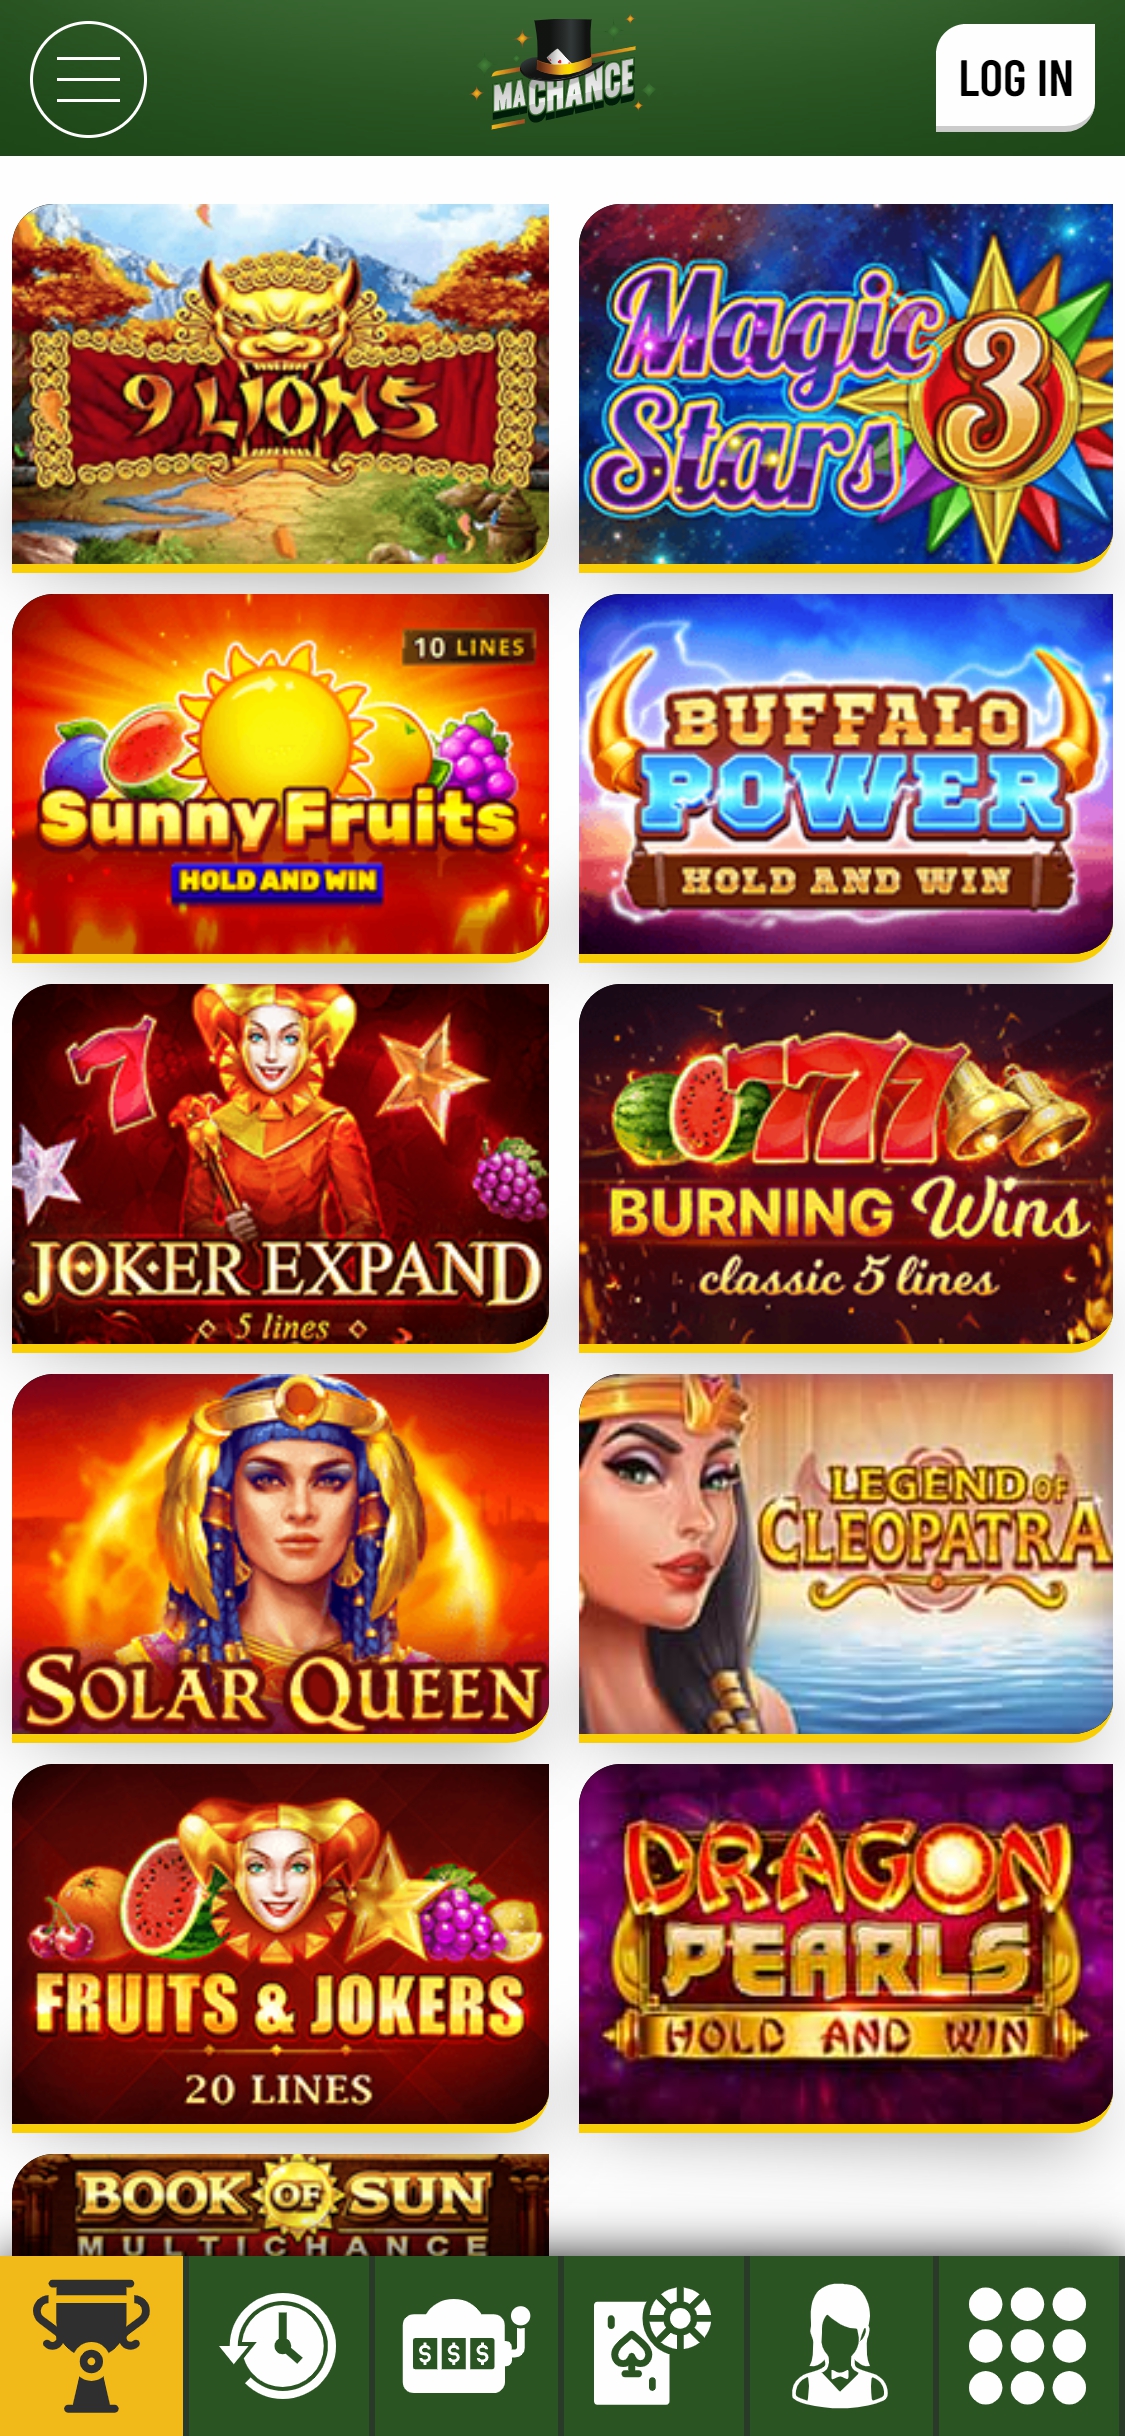 MaChance Casino Mobile Games Review